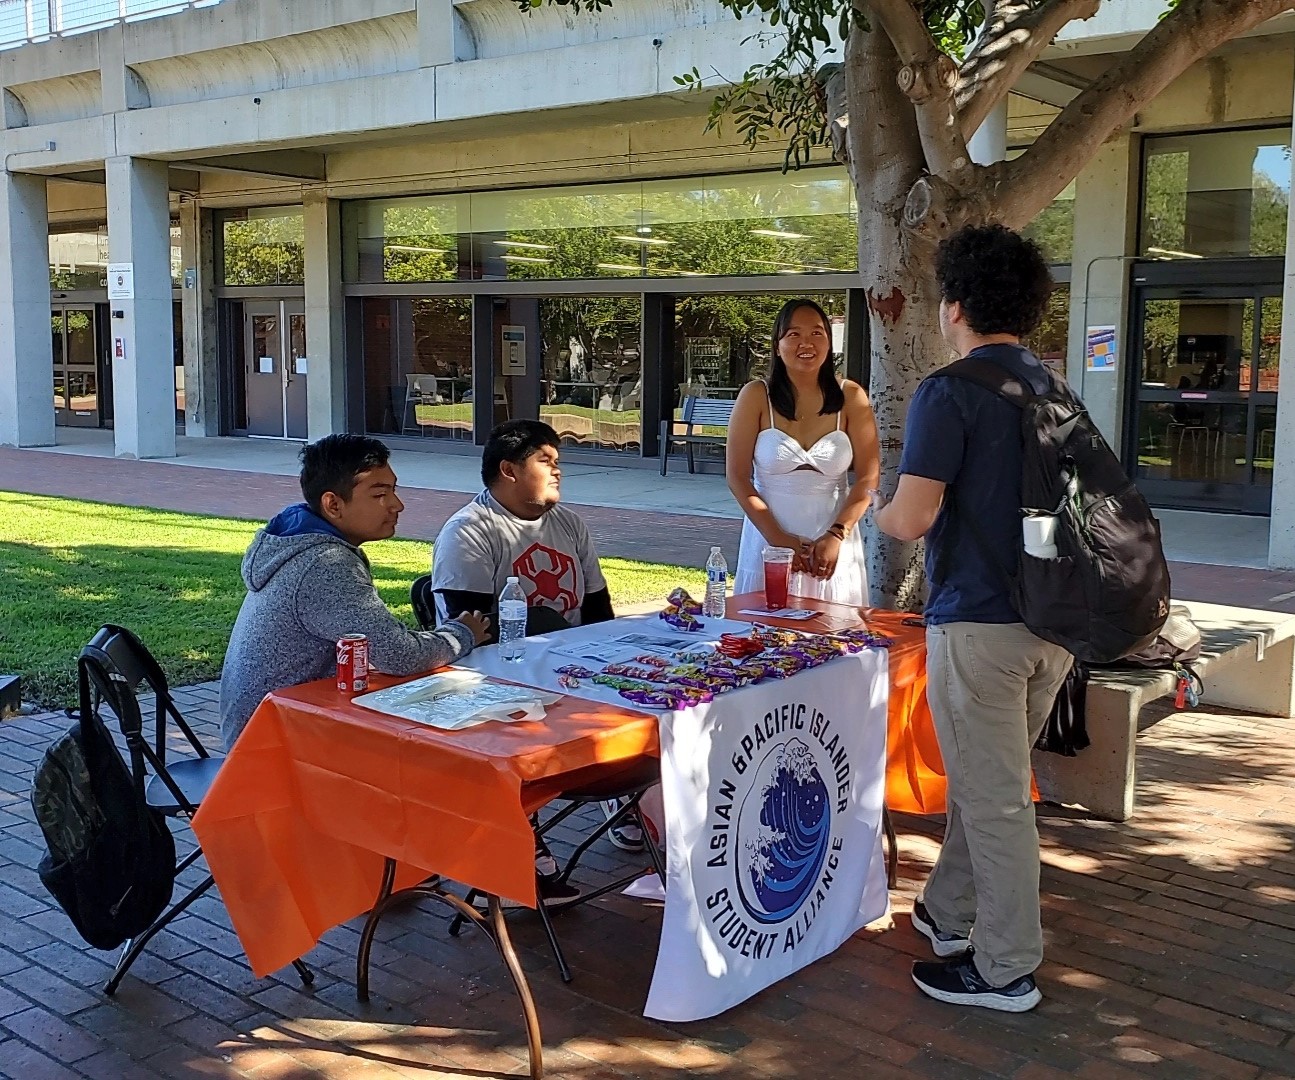 Kimberly Codera, right, dressed as Corpse Bride, shares information about the Asian Pacific Student Alliance along with fellow club members, Armando Vazquez, left, and Jose Castrejon, center, Tuesday, Oct. 31, 2023. Photo by Kevin Ouellette/City Times Media